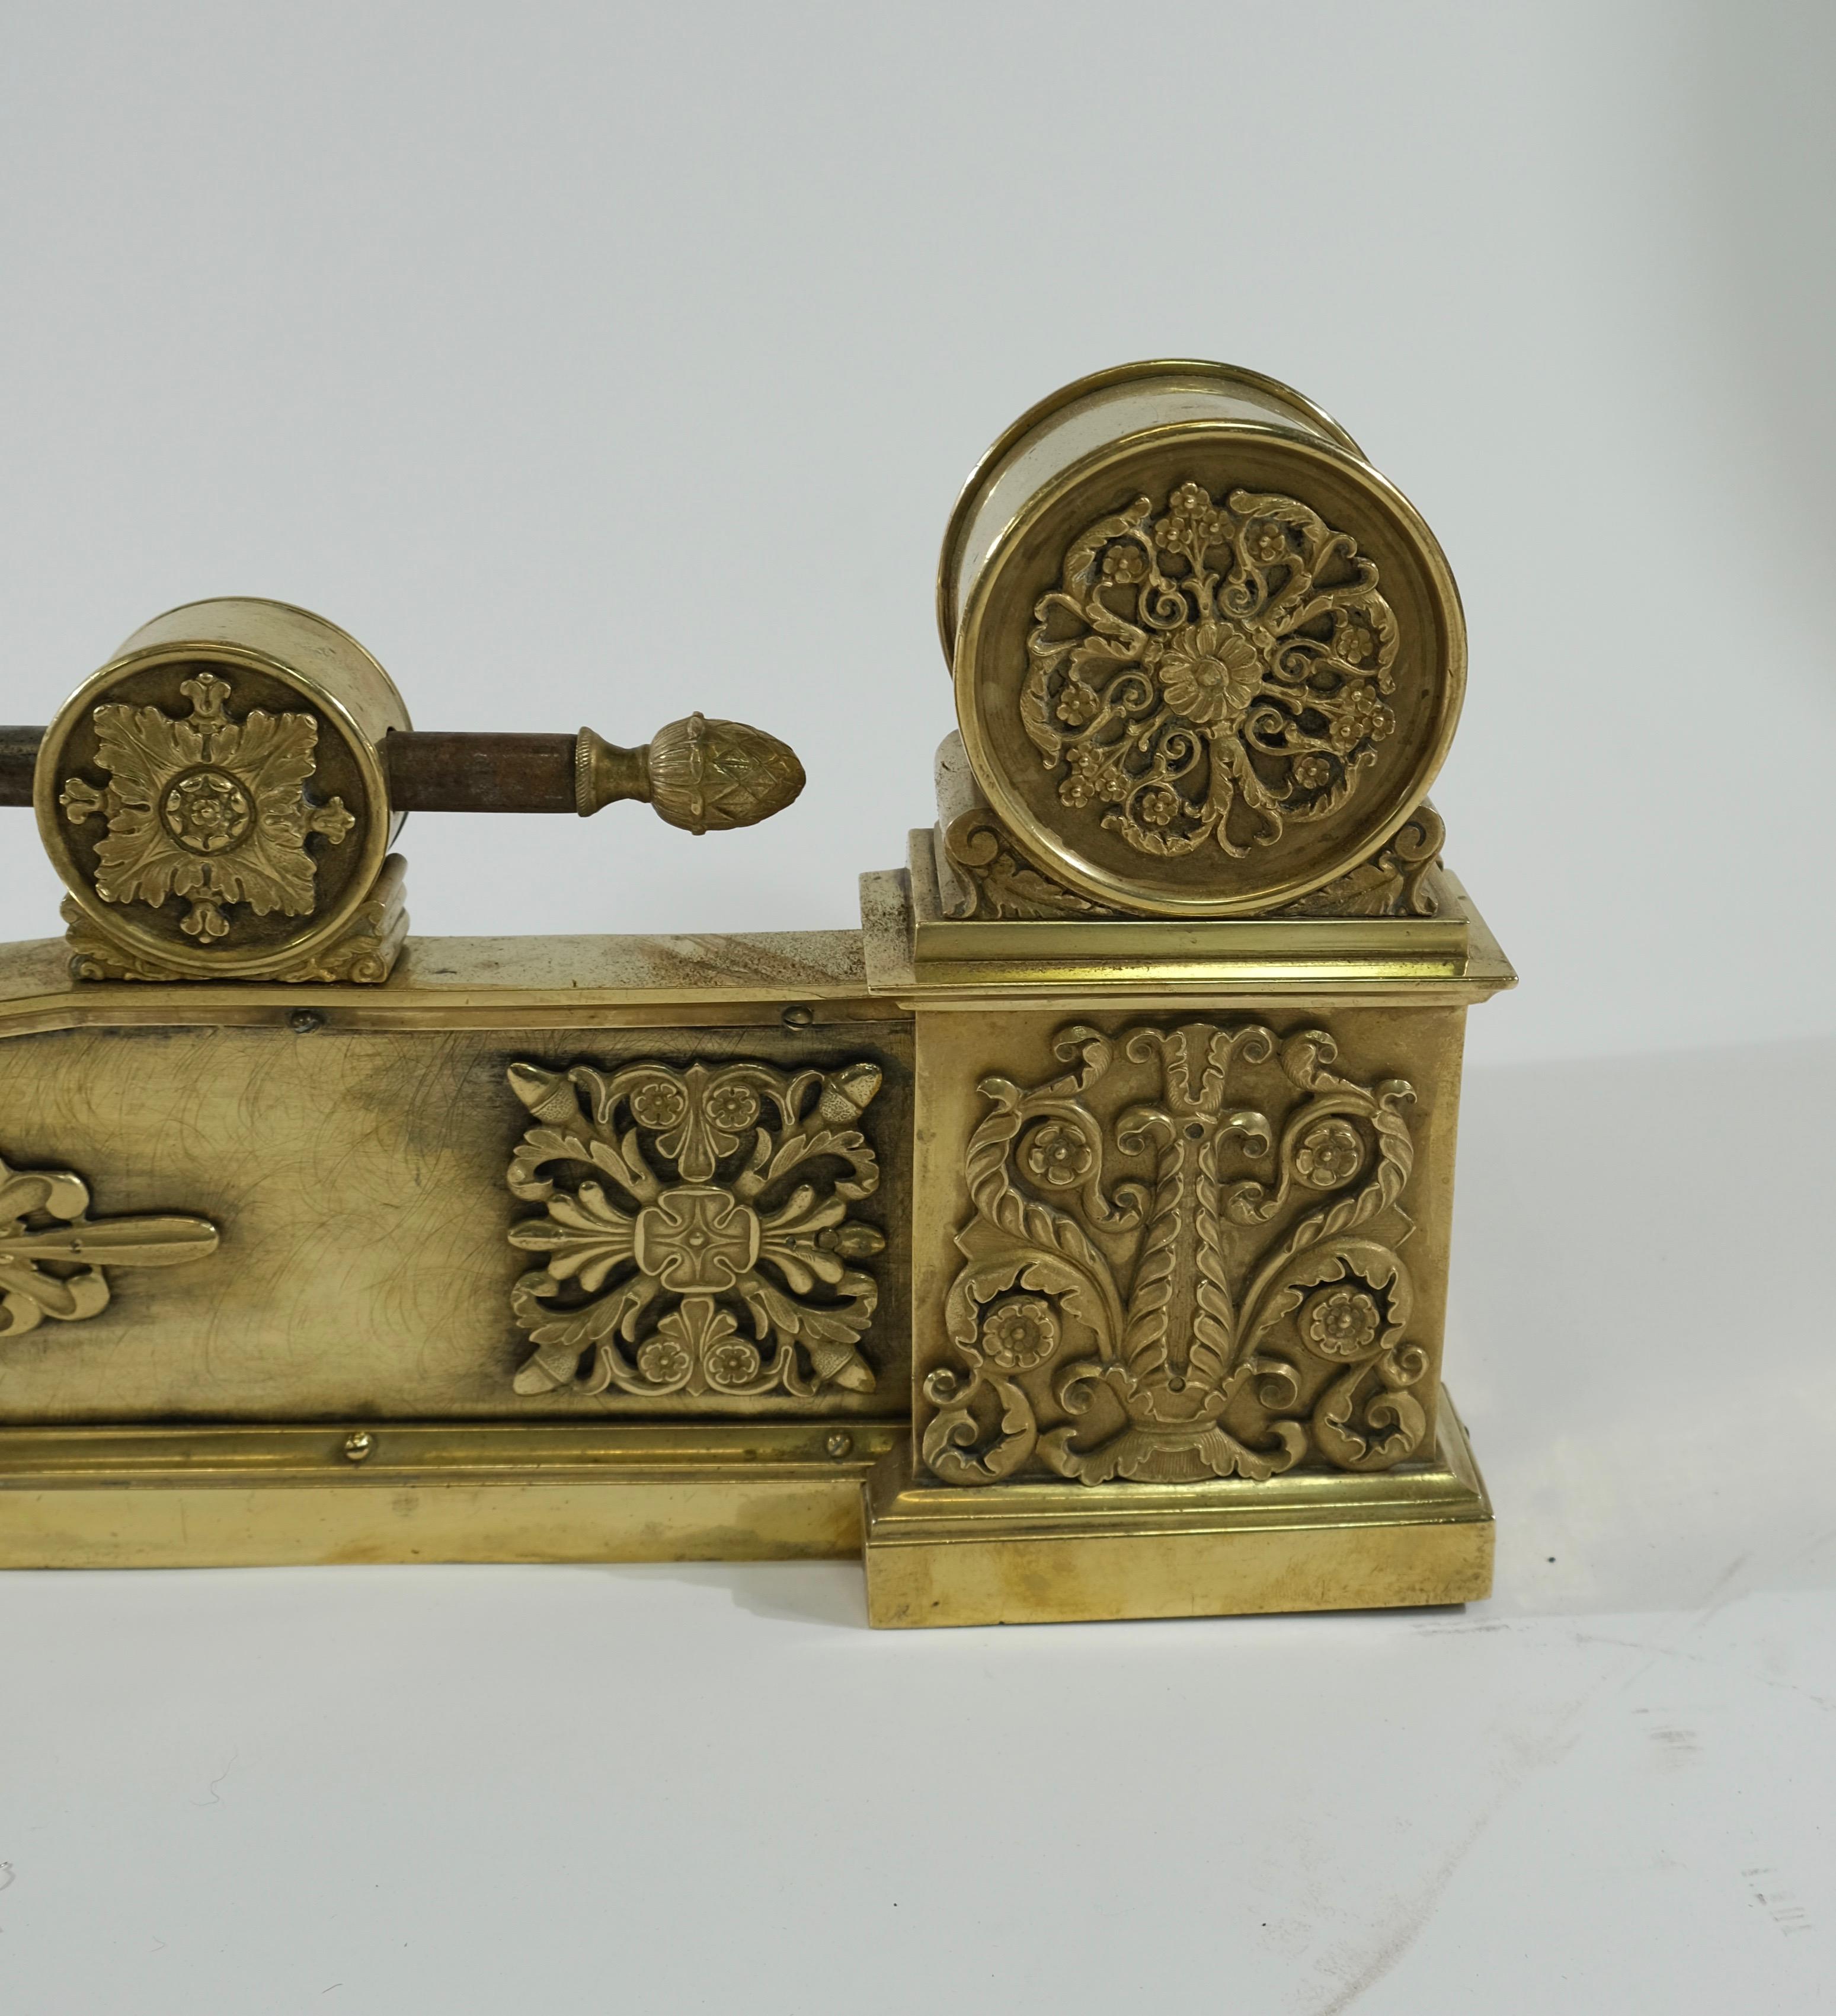 A French decorative stand to place in a fireplace, gilt, brass and bronze. 
This item will make any fireplace look great.